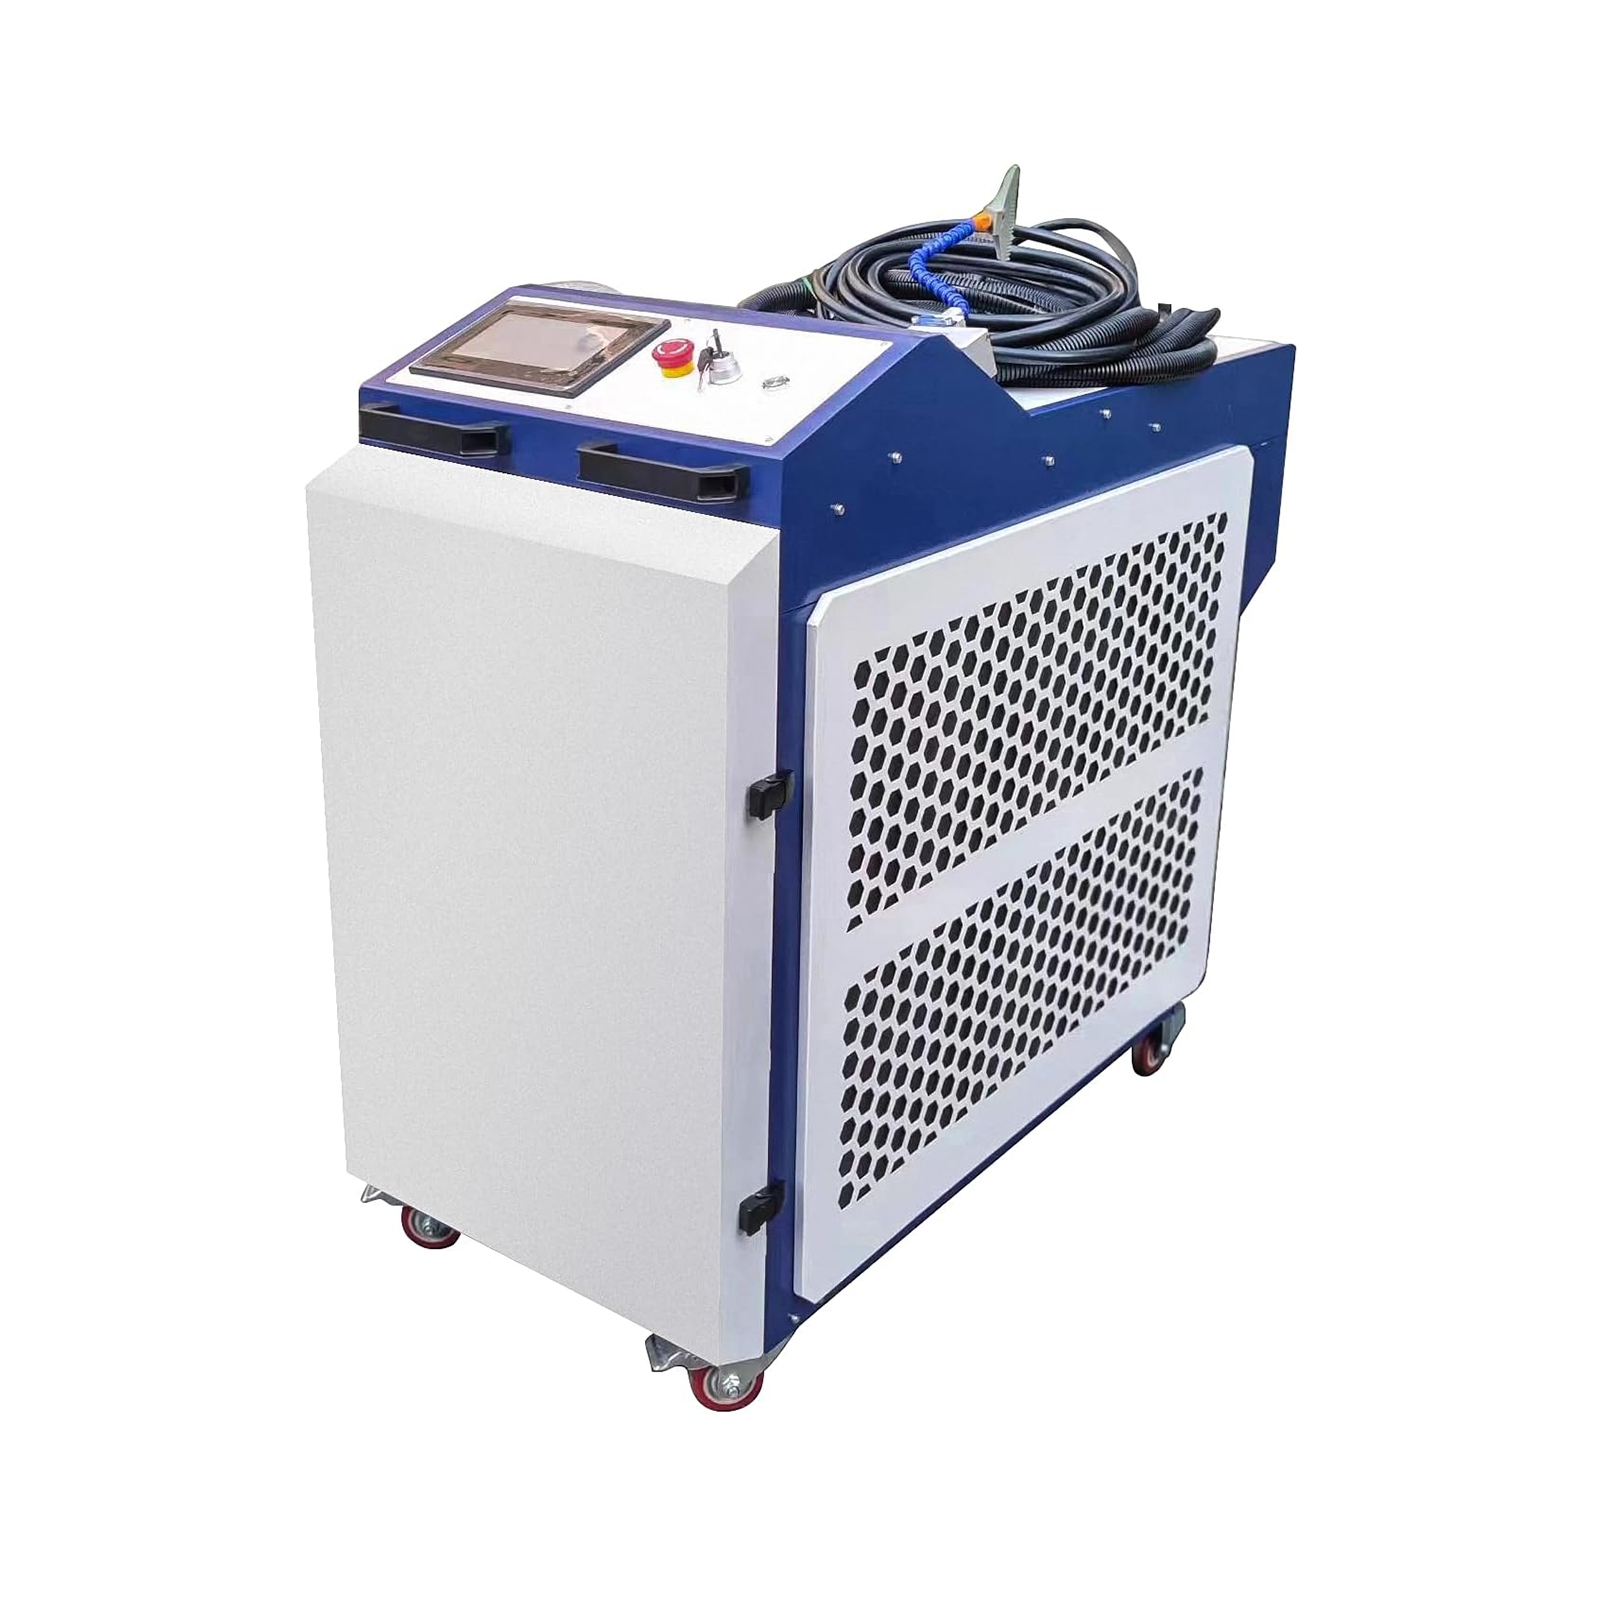 MCWlaser 3000W Laser Cleaning Machine Raycus Fiber Laser Rust Remover with 20m Cable for Rust Paint Coating Oil Stain Removal